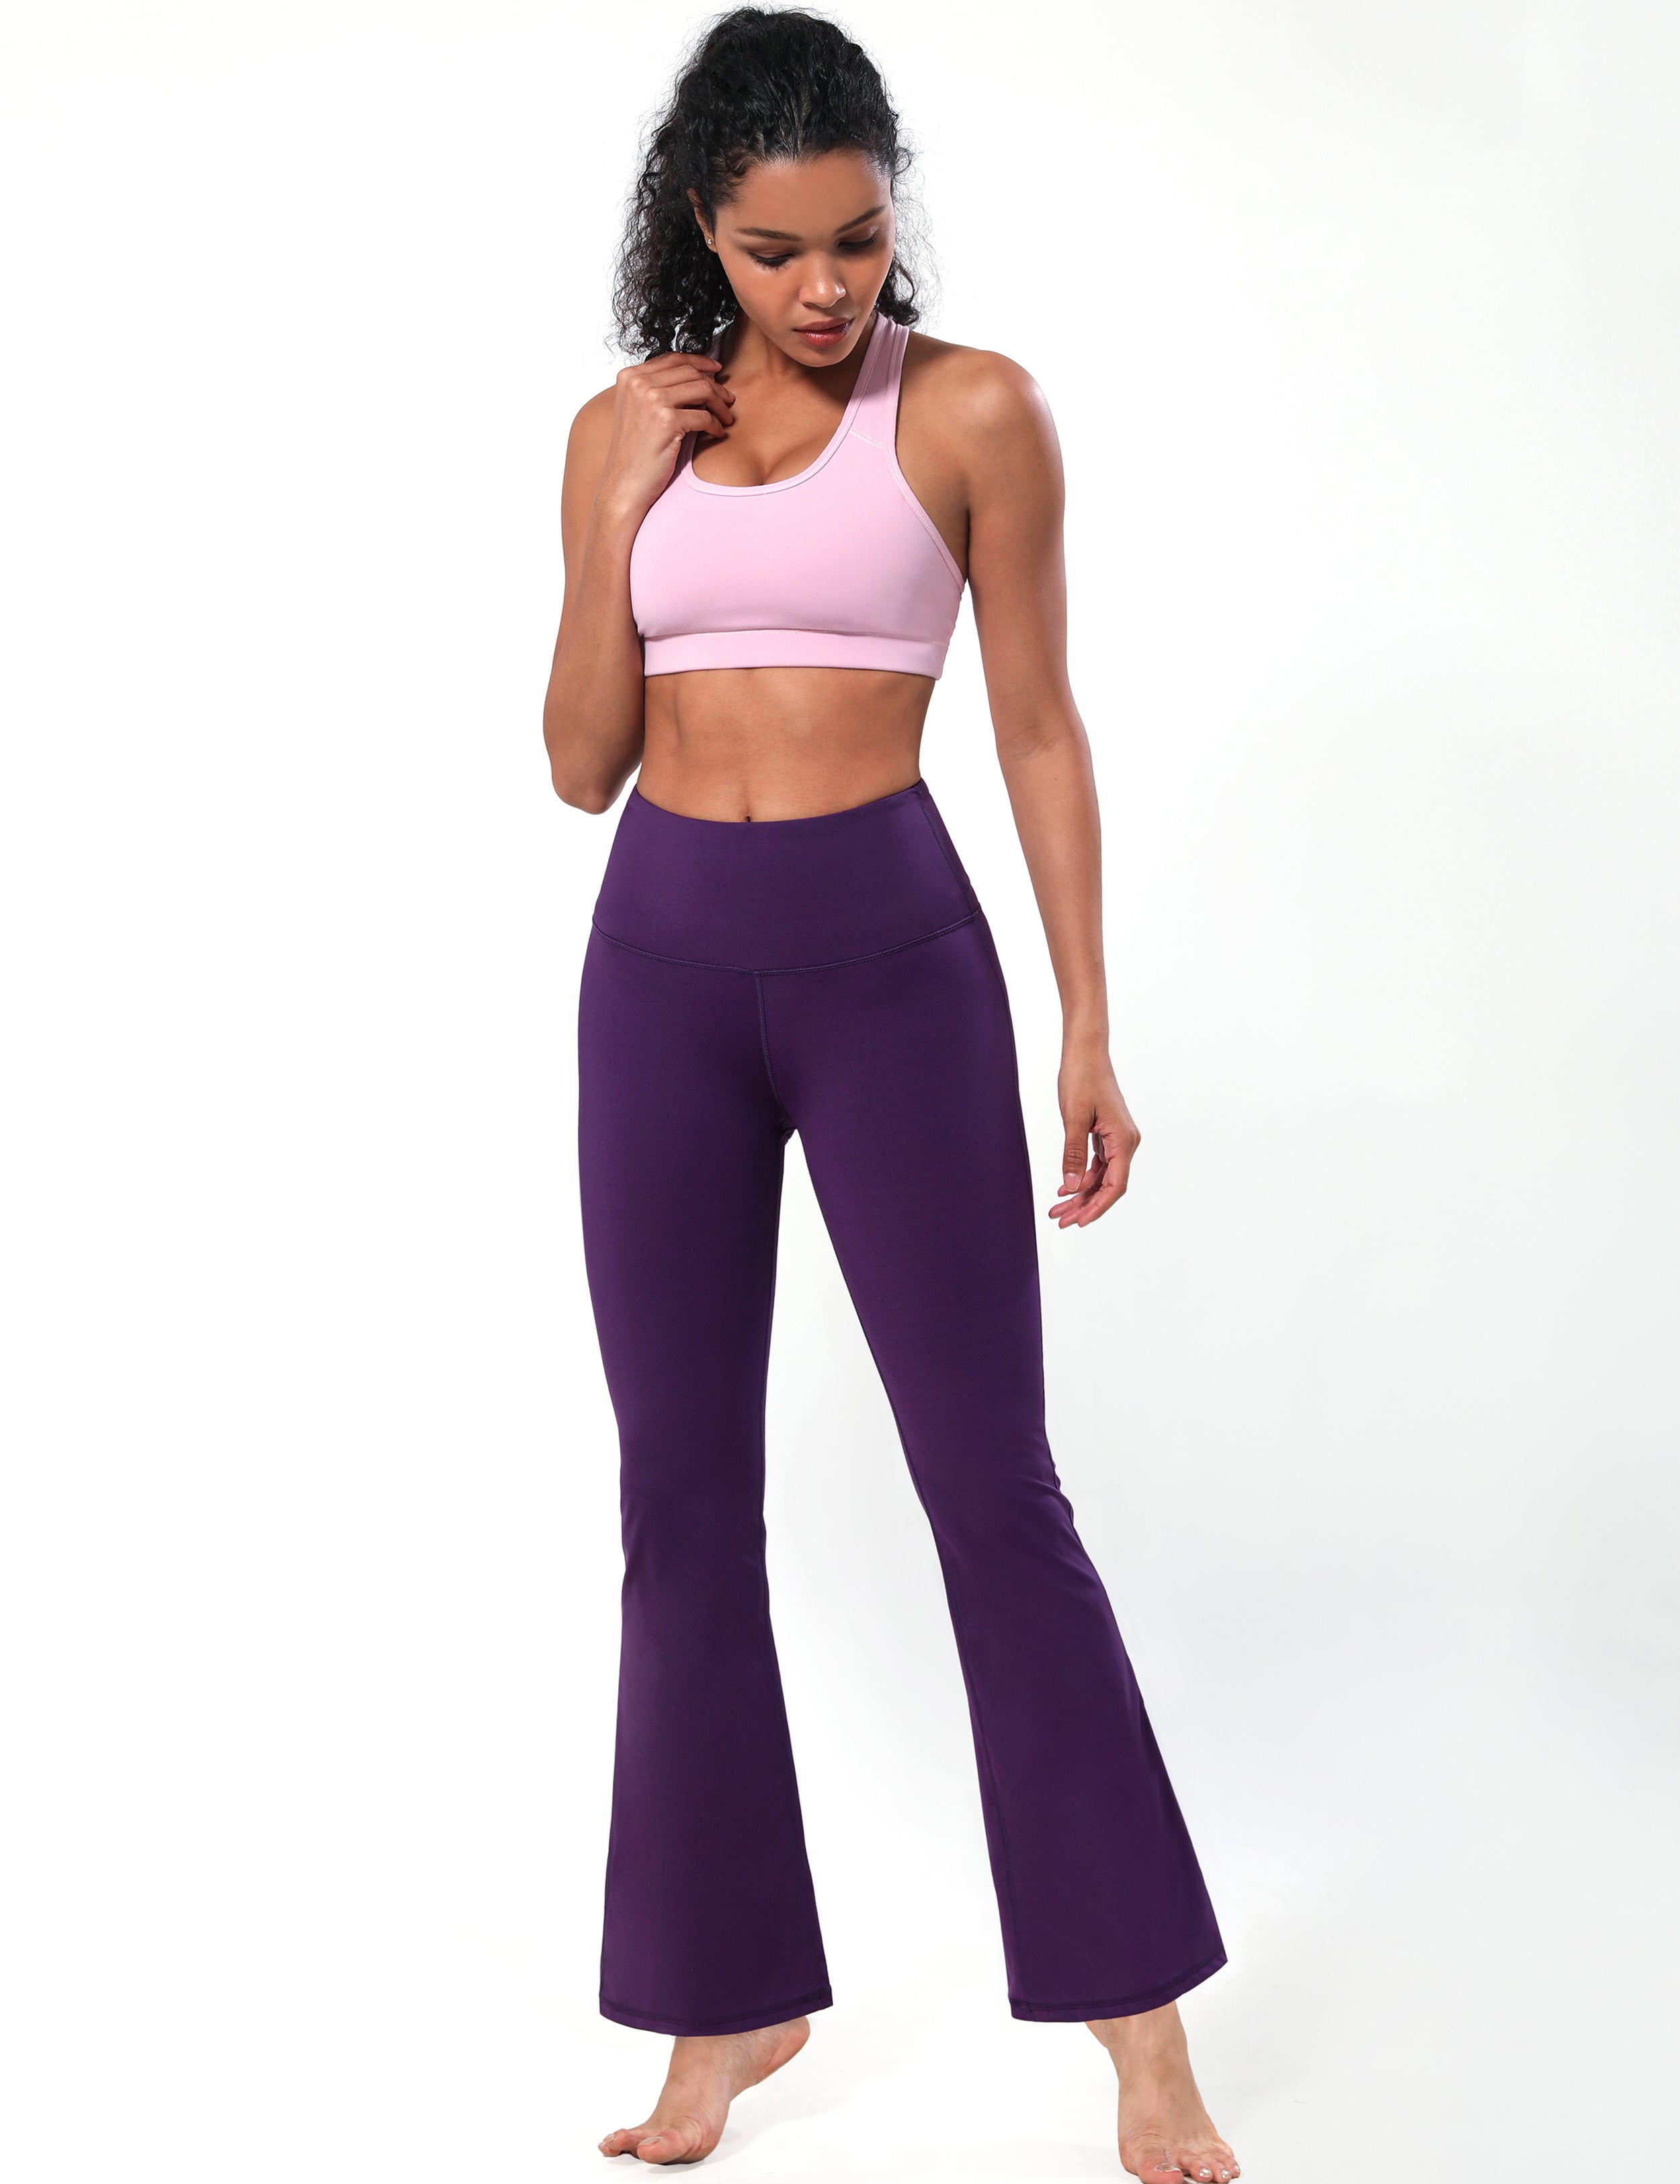 High Waist Bootcut Leggings pansypurple 75%Nylon/25%Spandex Fabric doesn't attract lint easily 4-way stretch No see-through Moisture-wicking Tummy control Inner pocket Five lengths